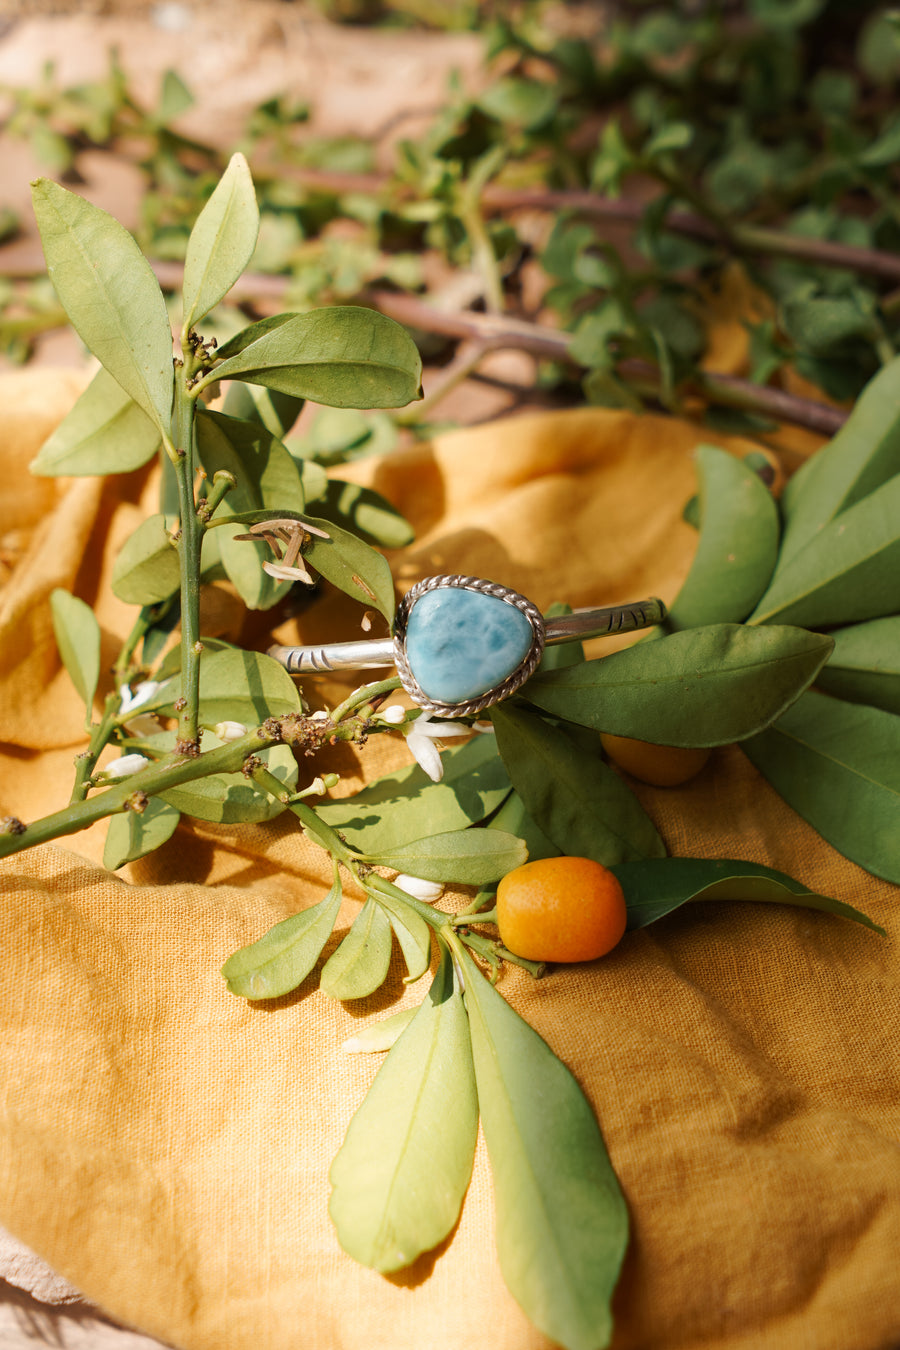 Stacking Cuff with Larimar